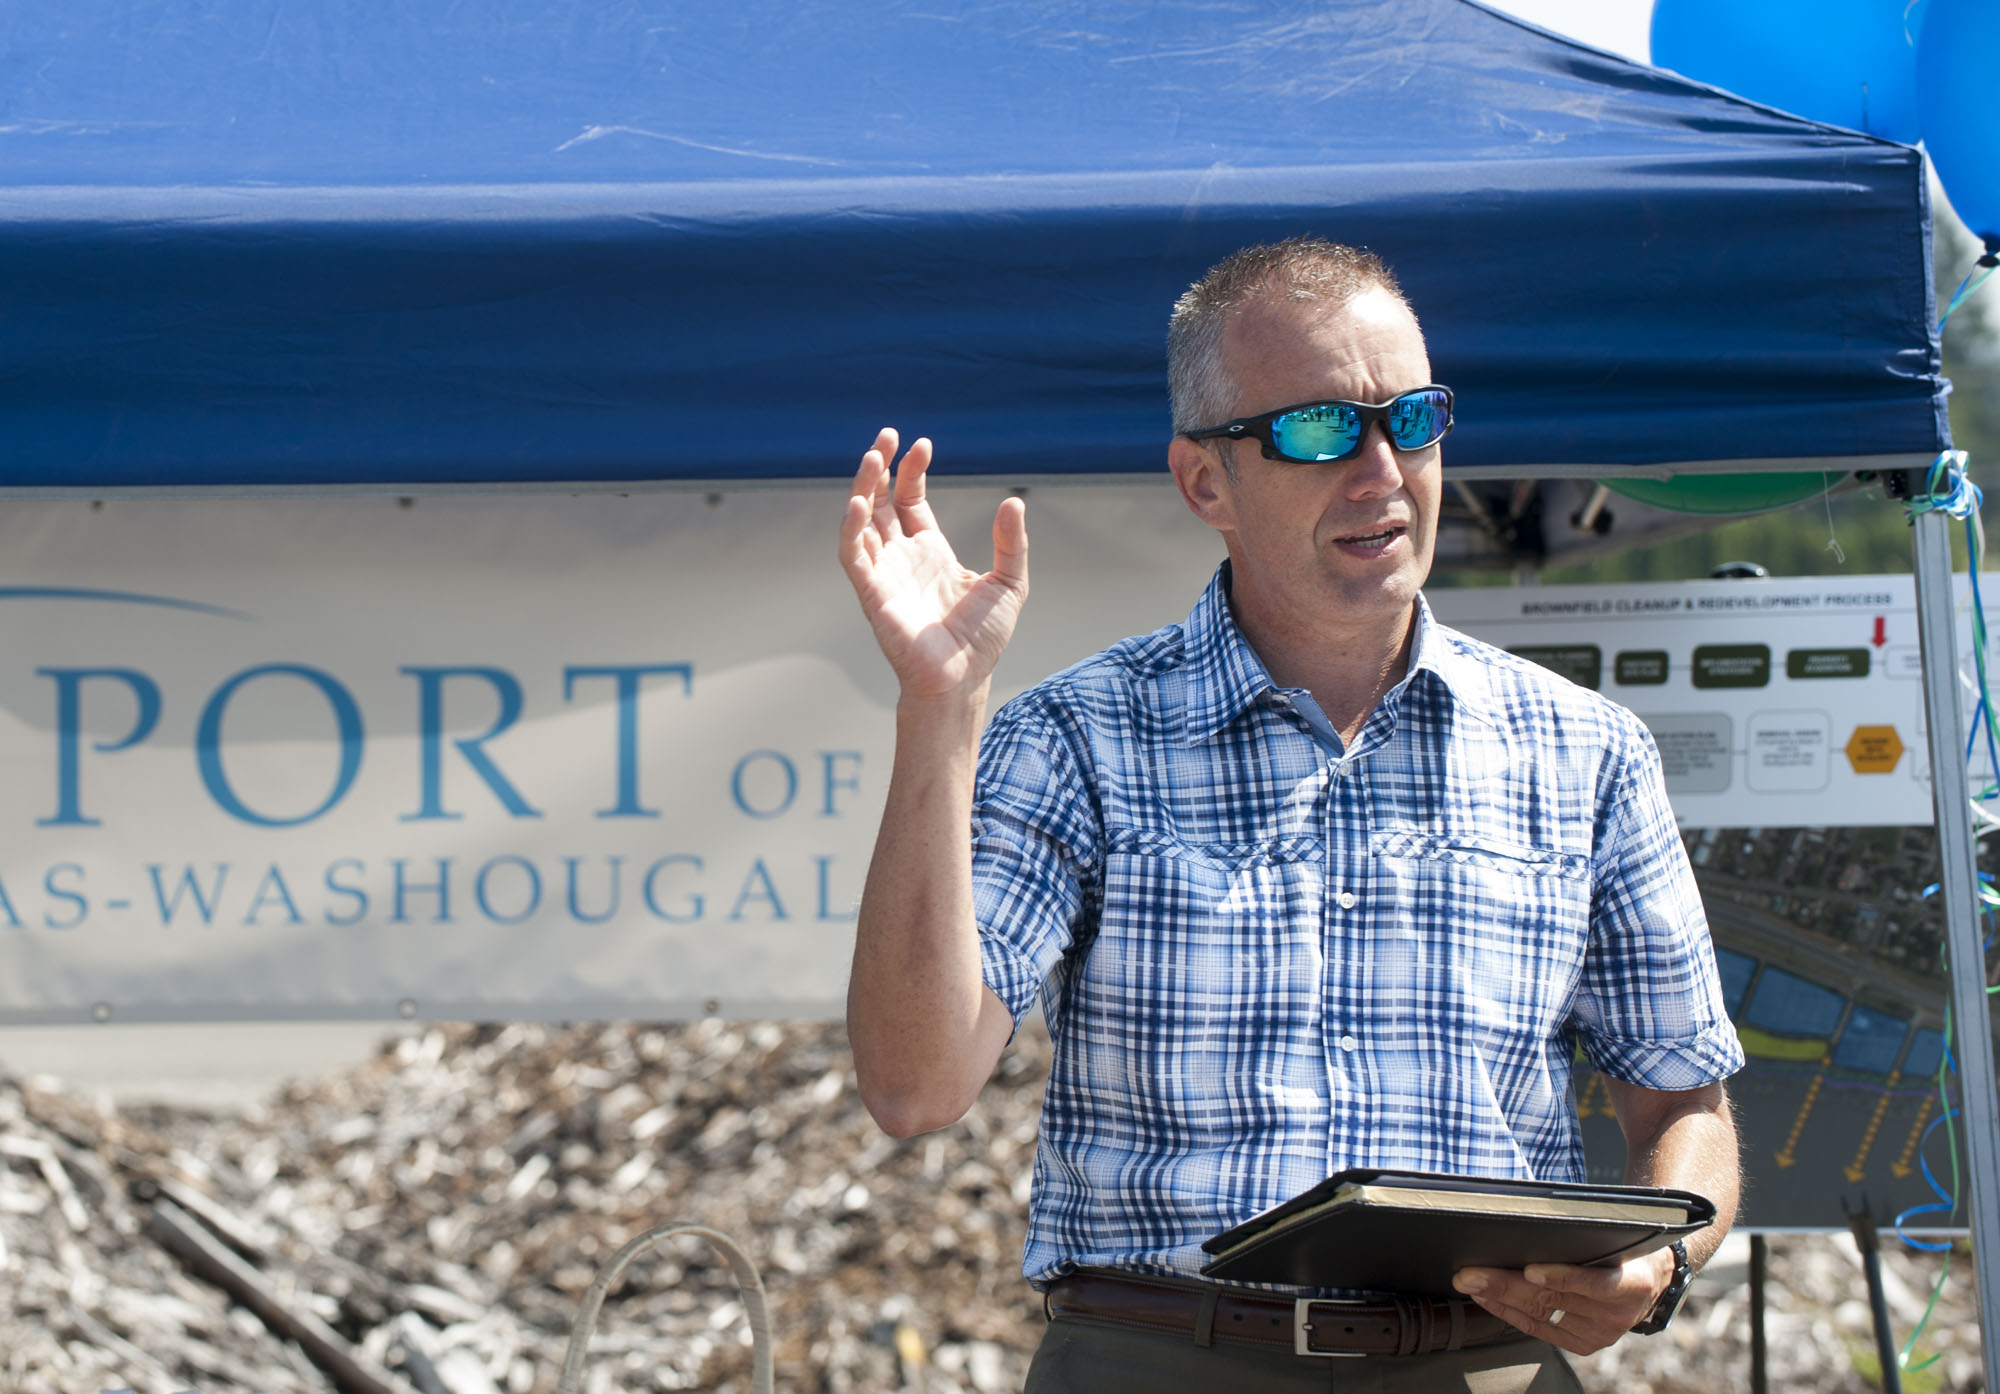 David Ripp, director of the Port of Camas-Washougal speaks at an event in Washougal  on July 8. The event was a groundbreaking for the Washougal Waterfront Park and Trail.